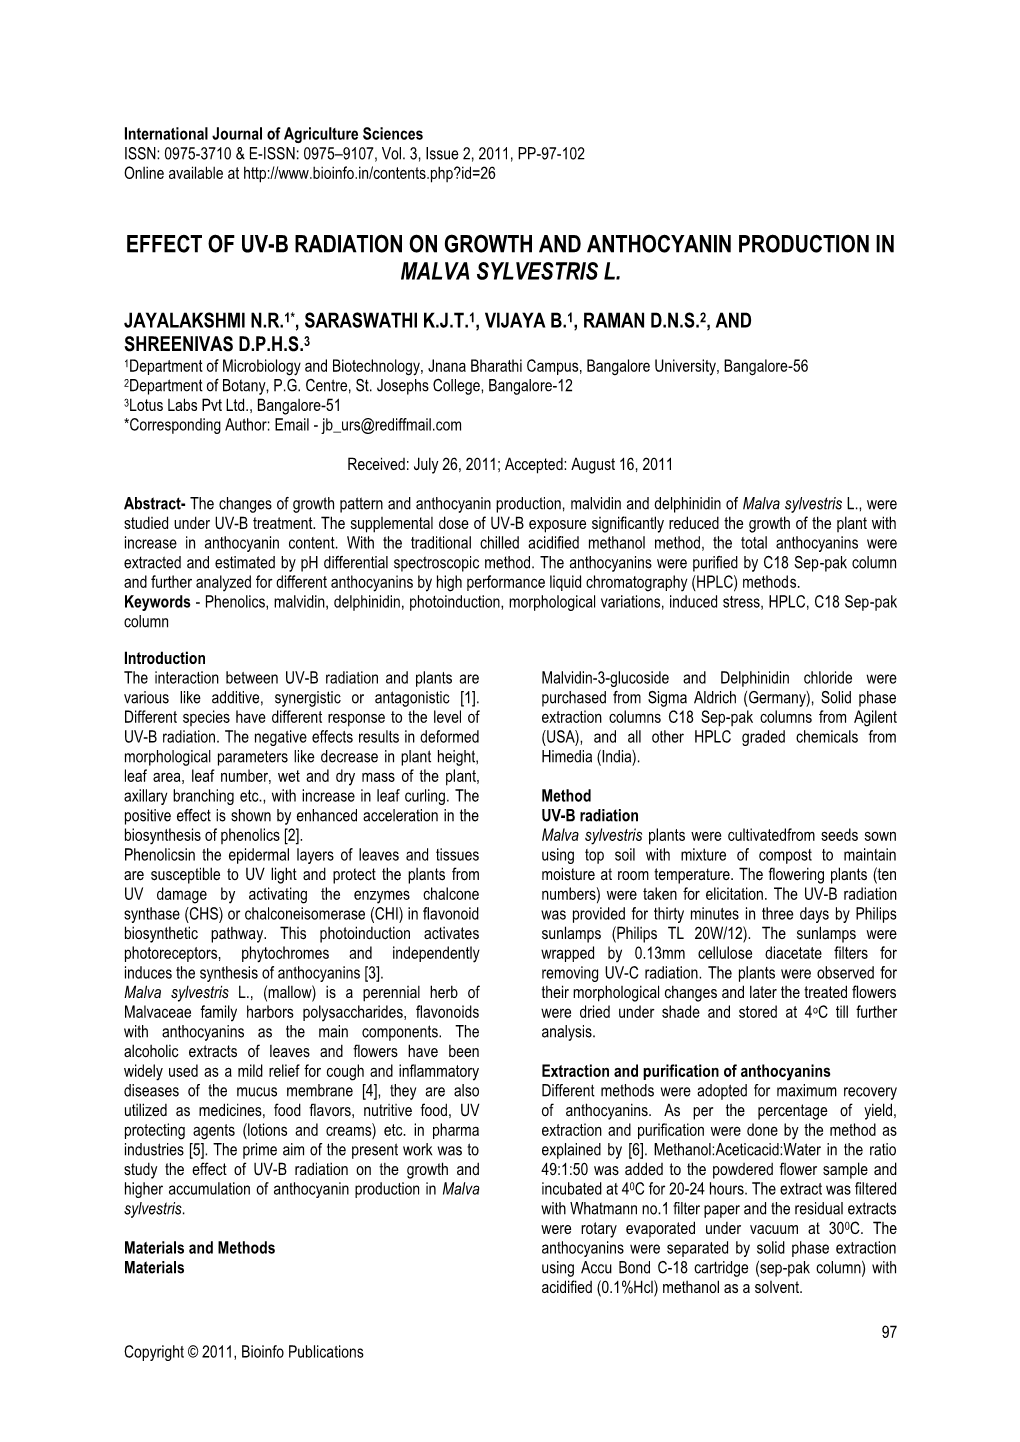 Effect of Uv-B Radiation on Growth and Anthocyanin Production in Malva Sylvestris L